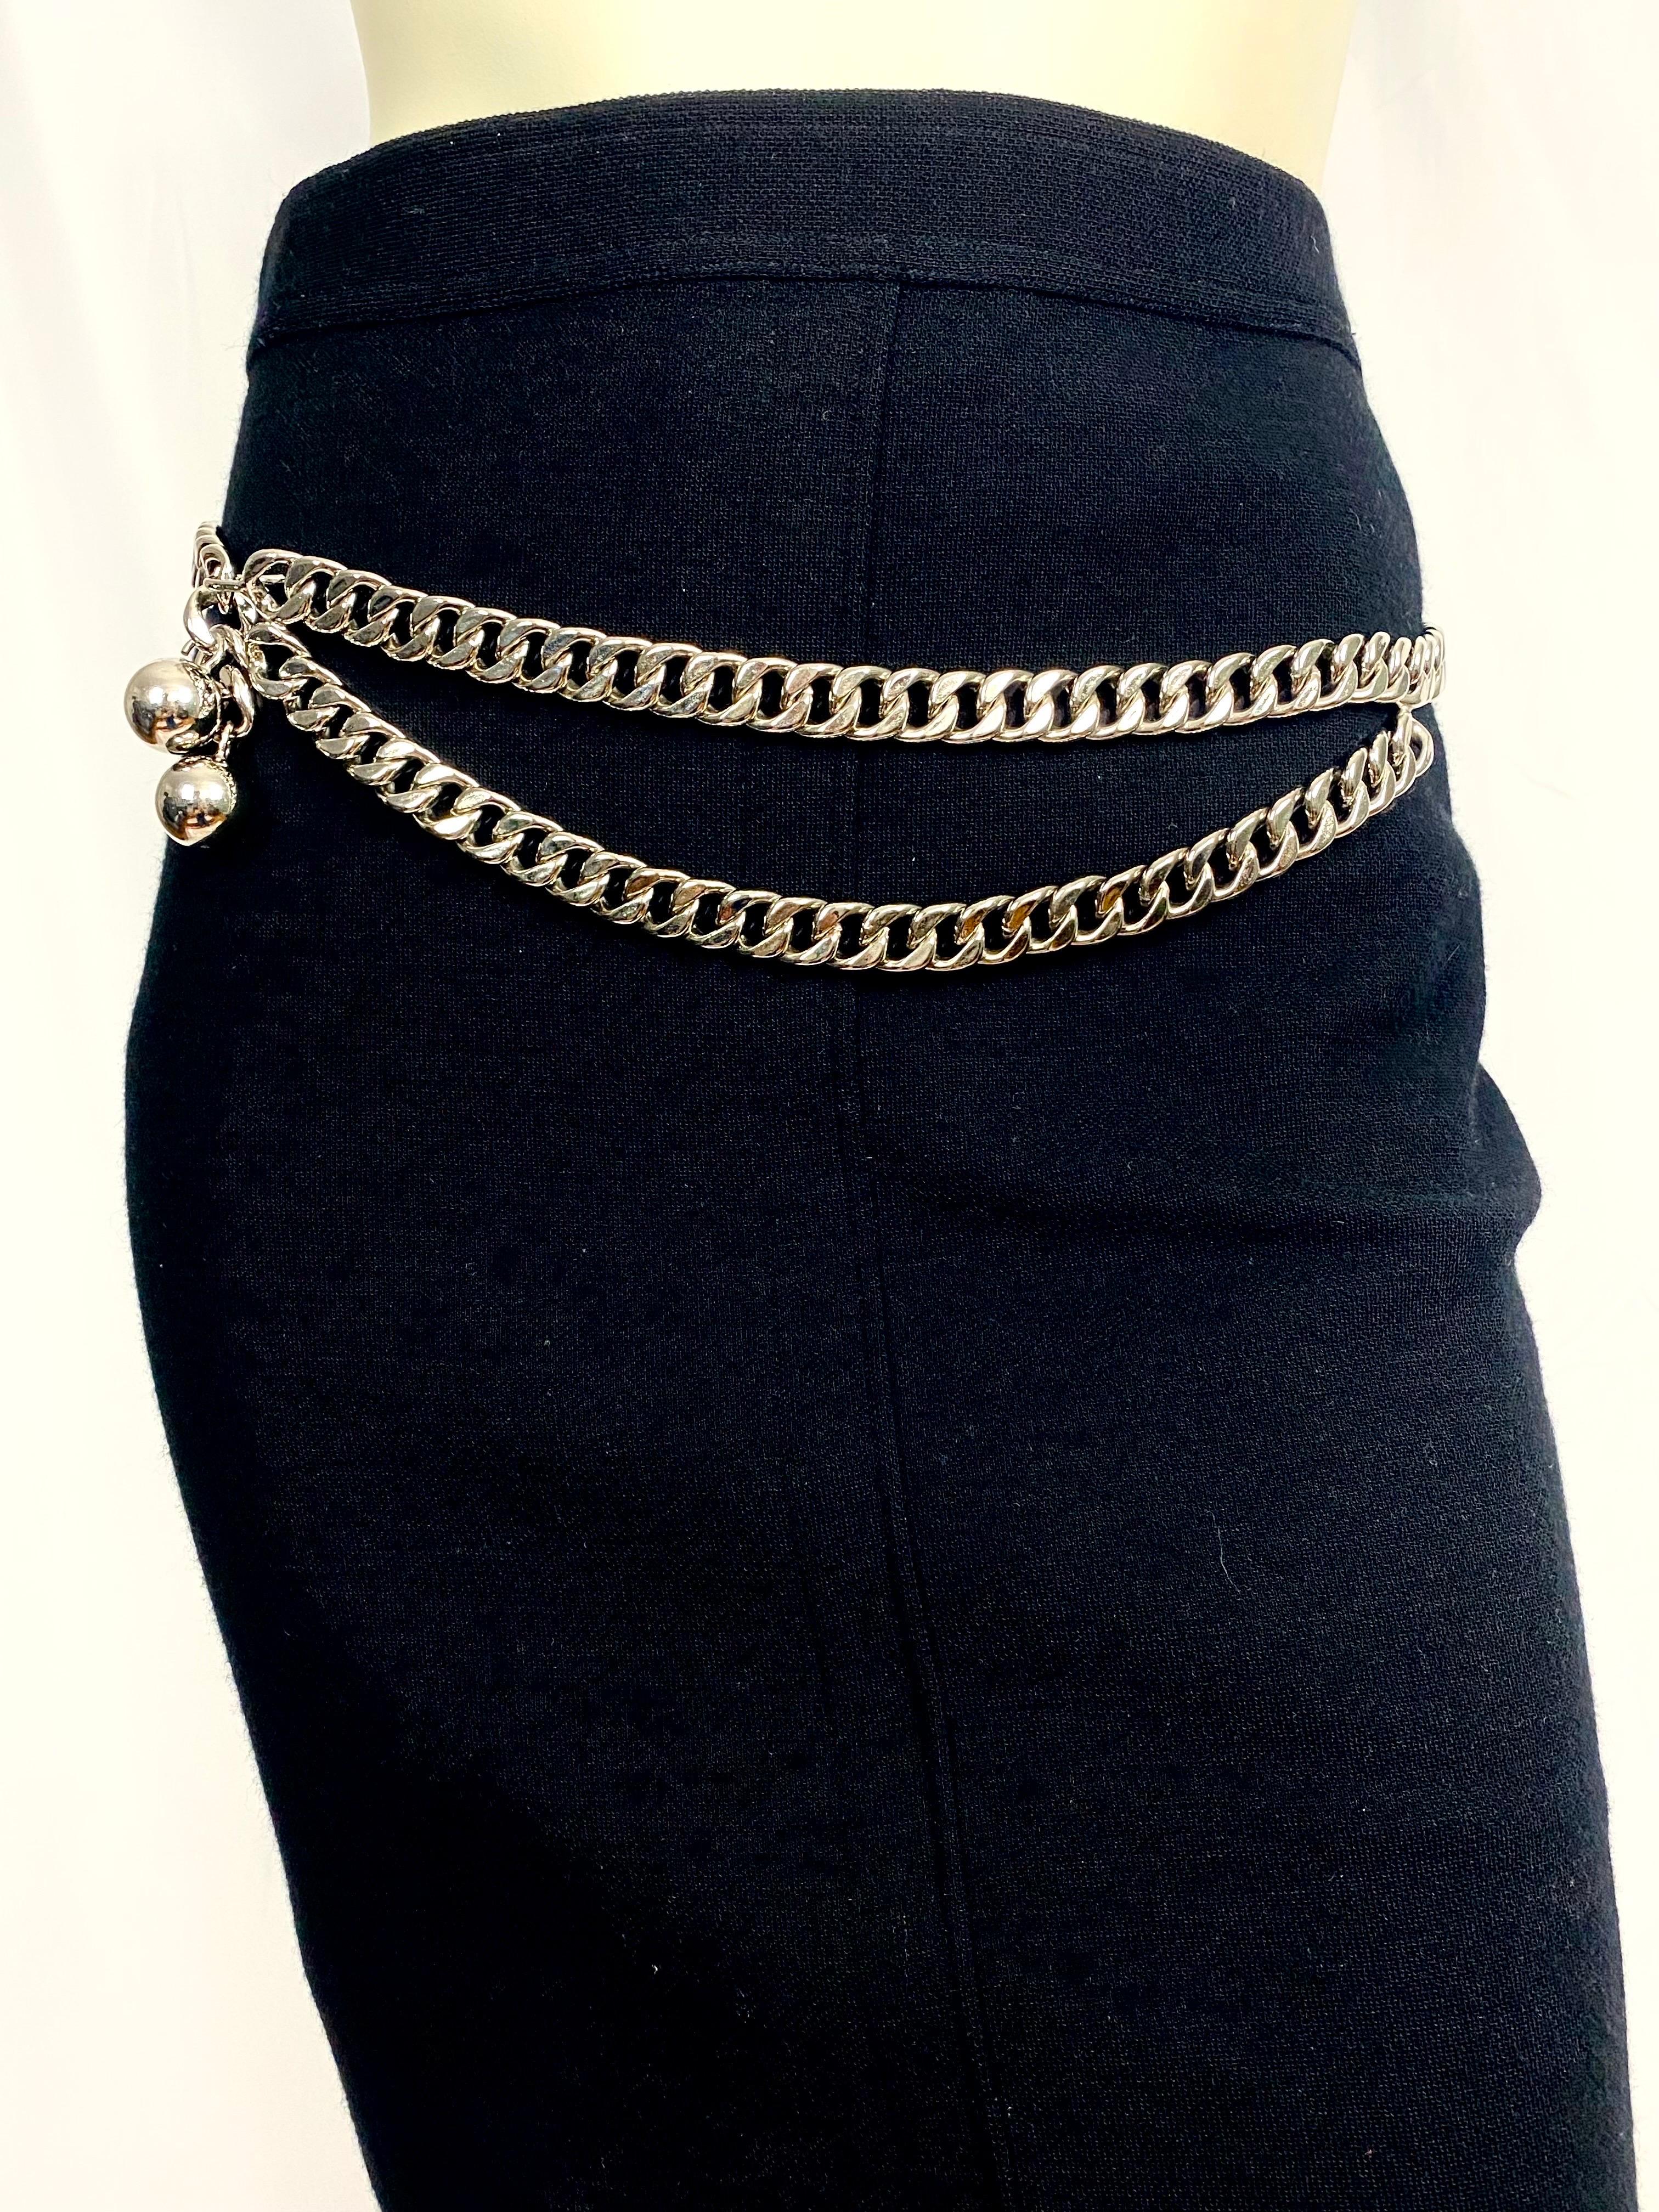 Vintage Chanel heavy silver chain link belt For Sale 5